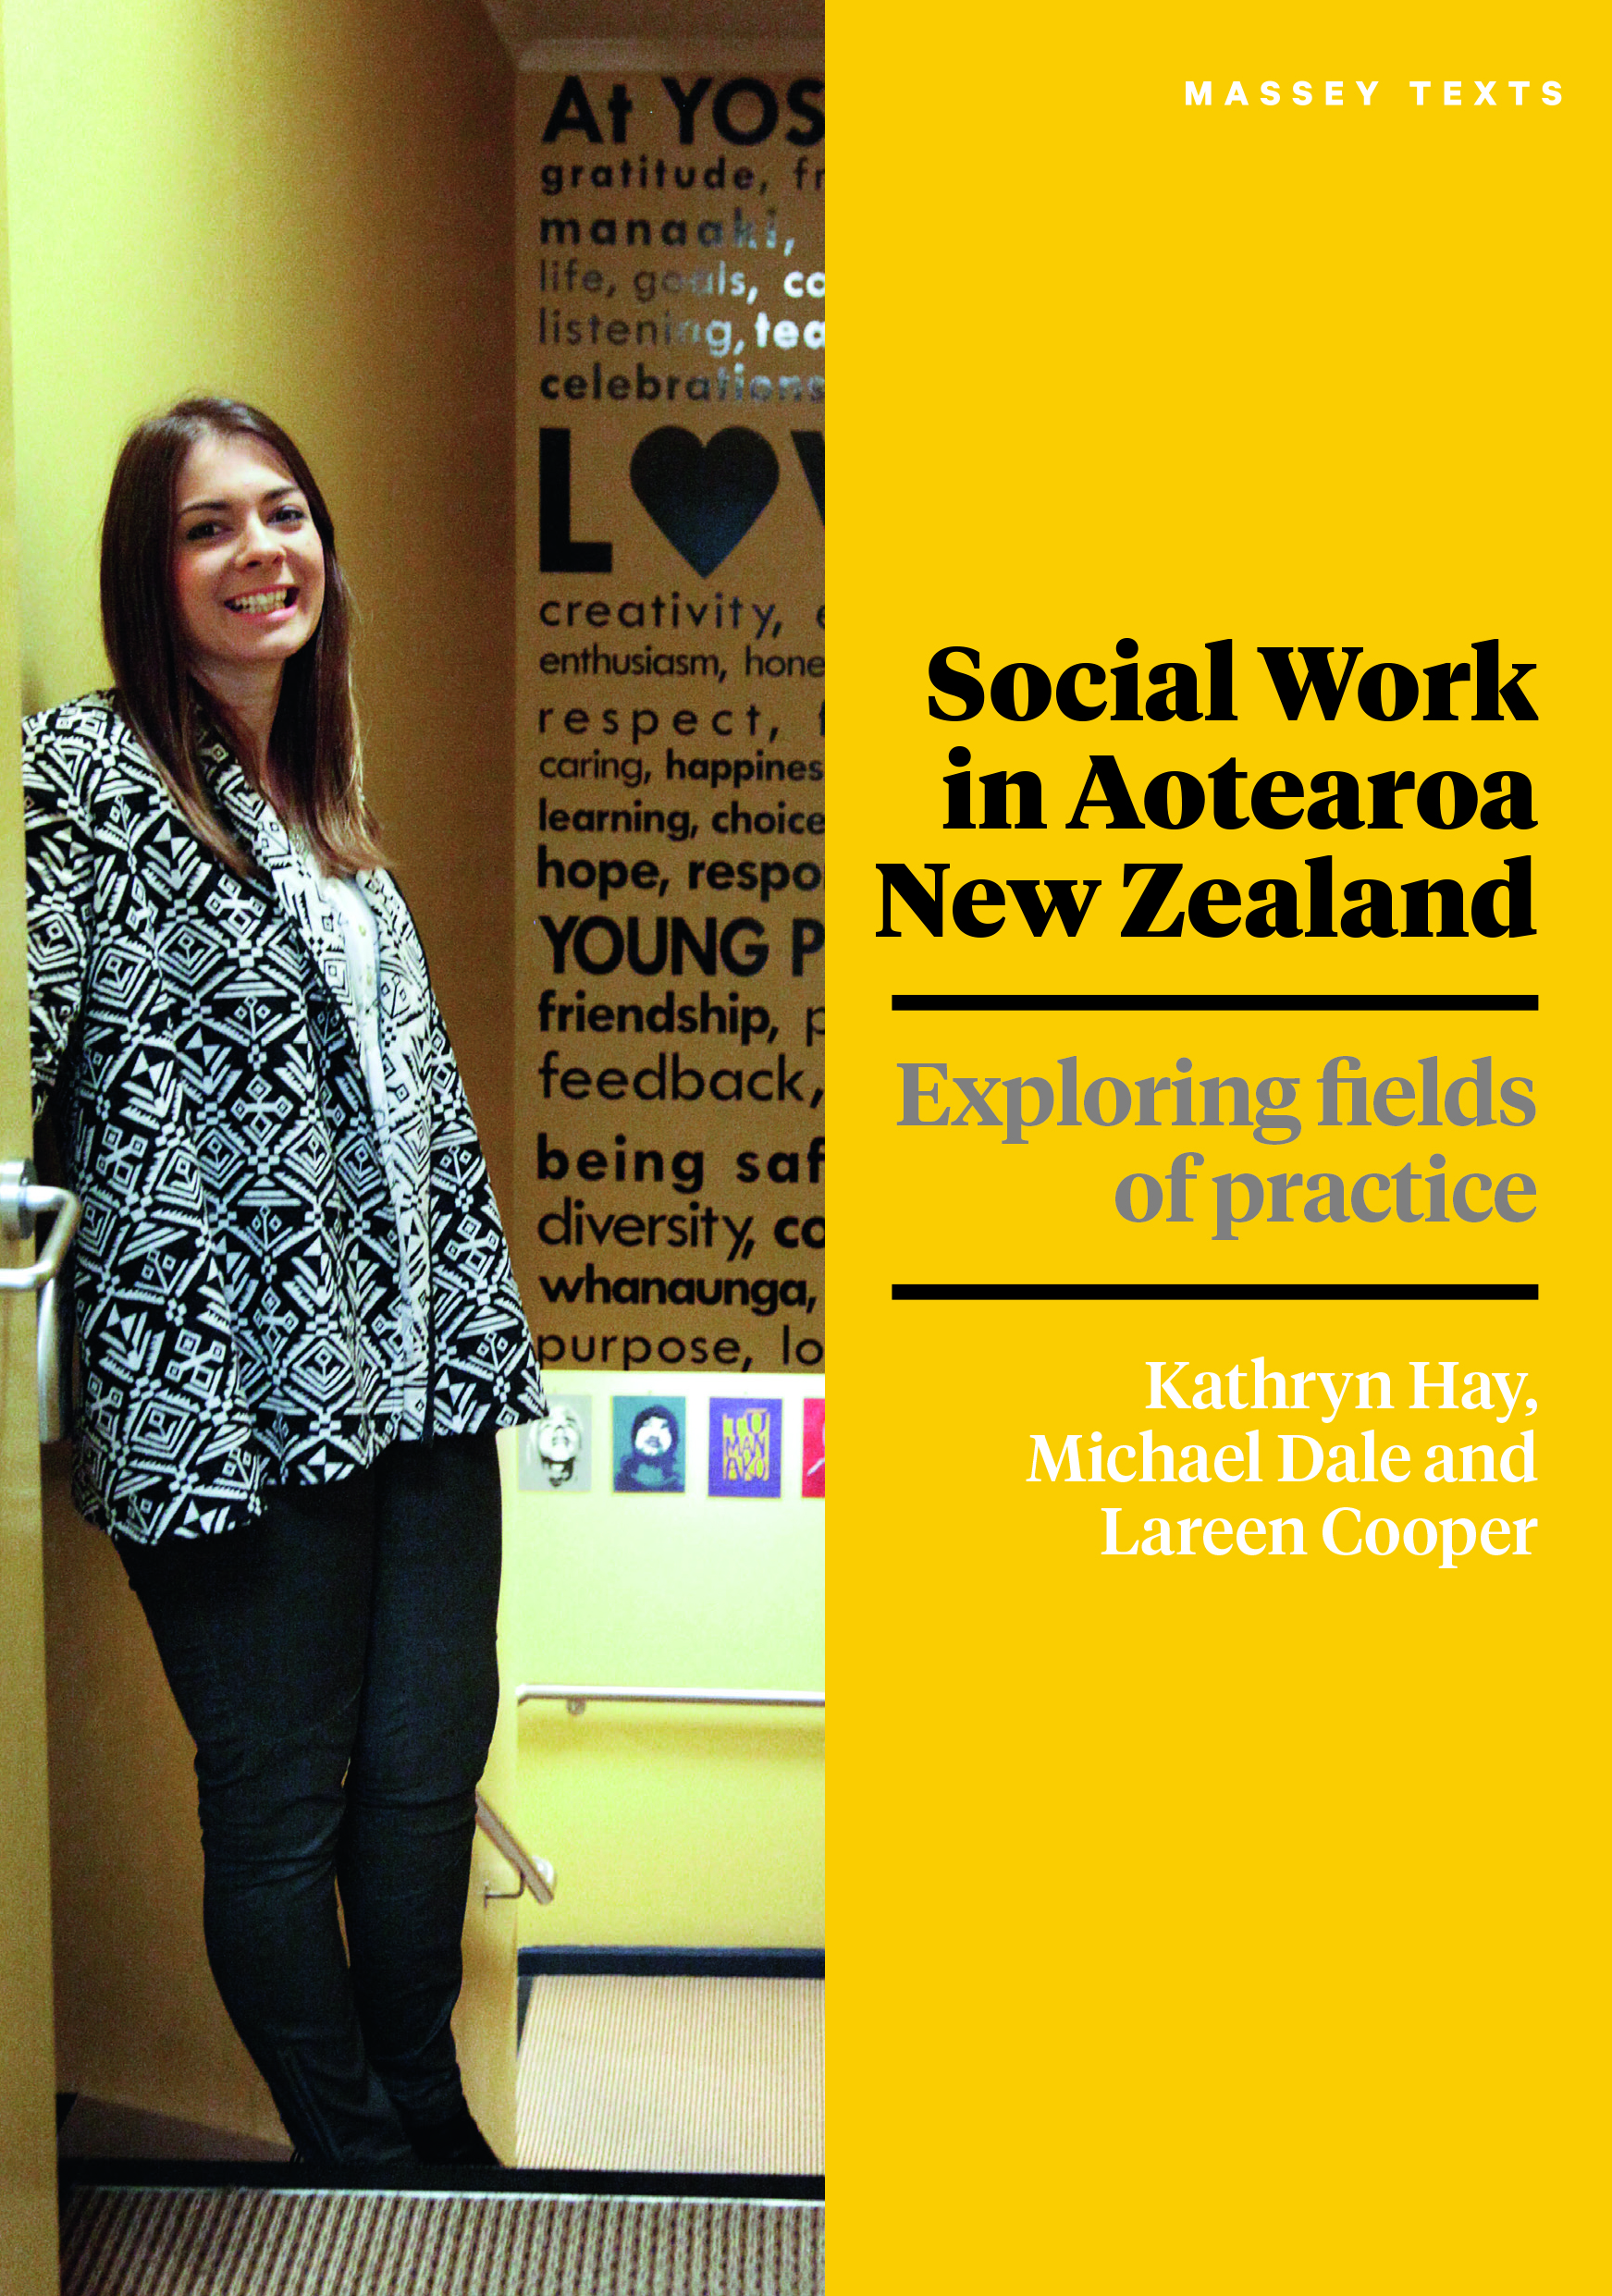 Social work jobs in new zealand government